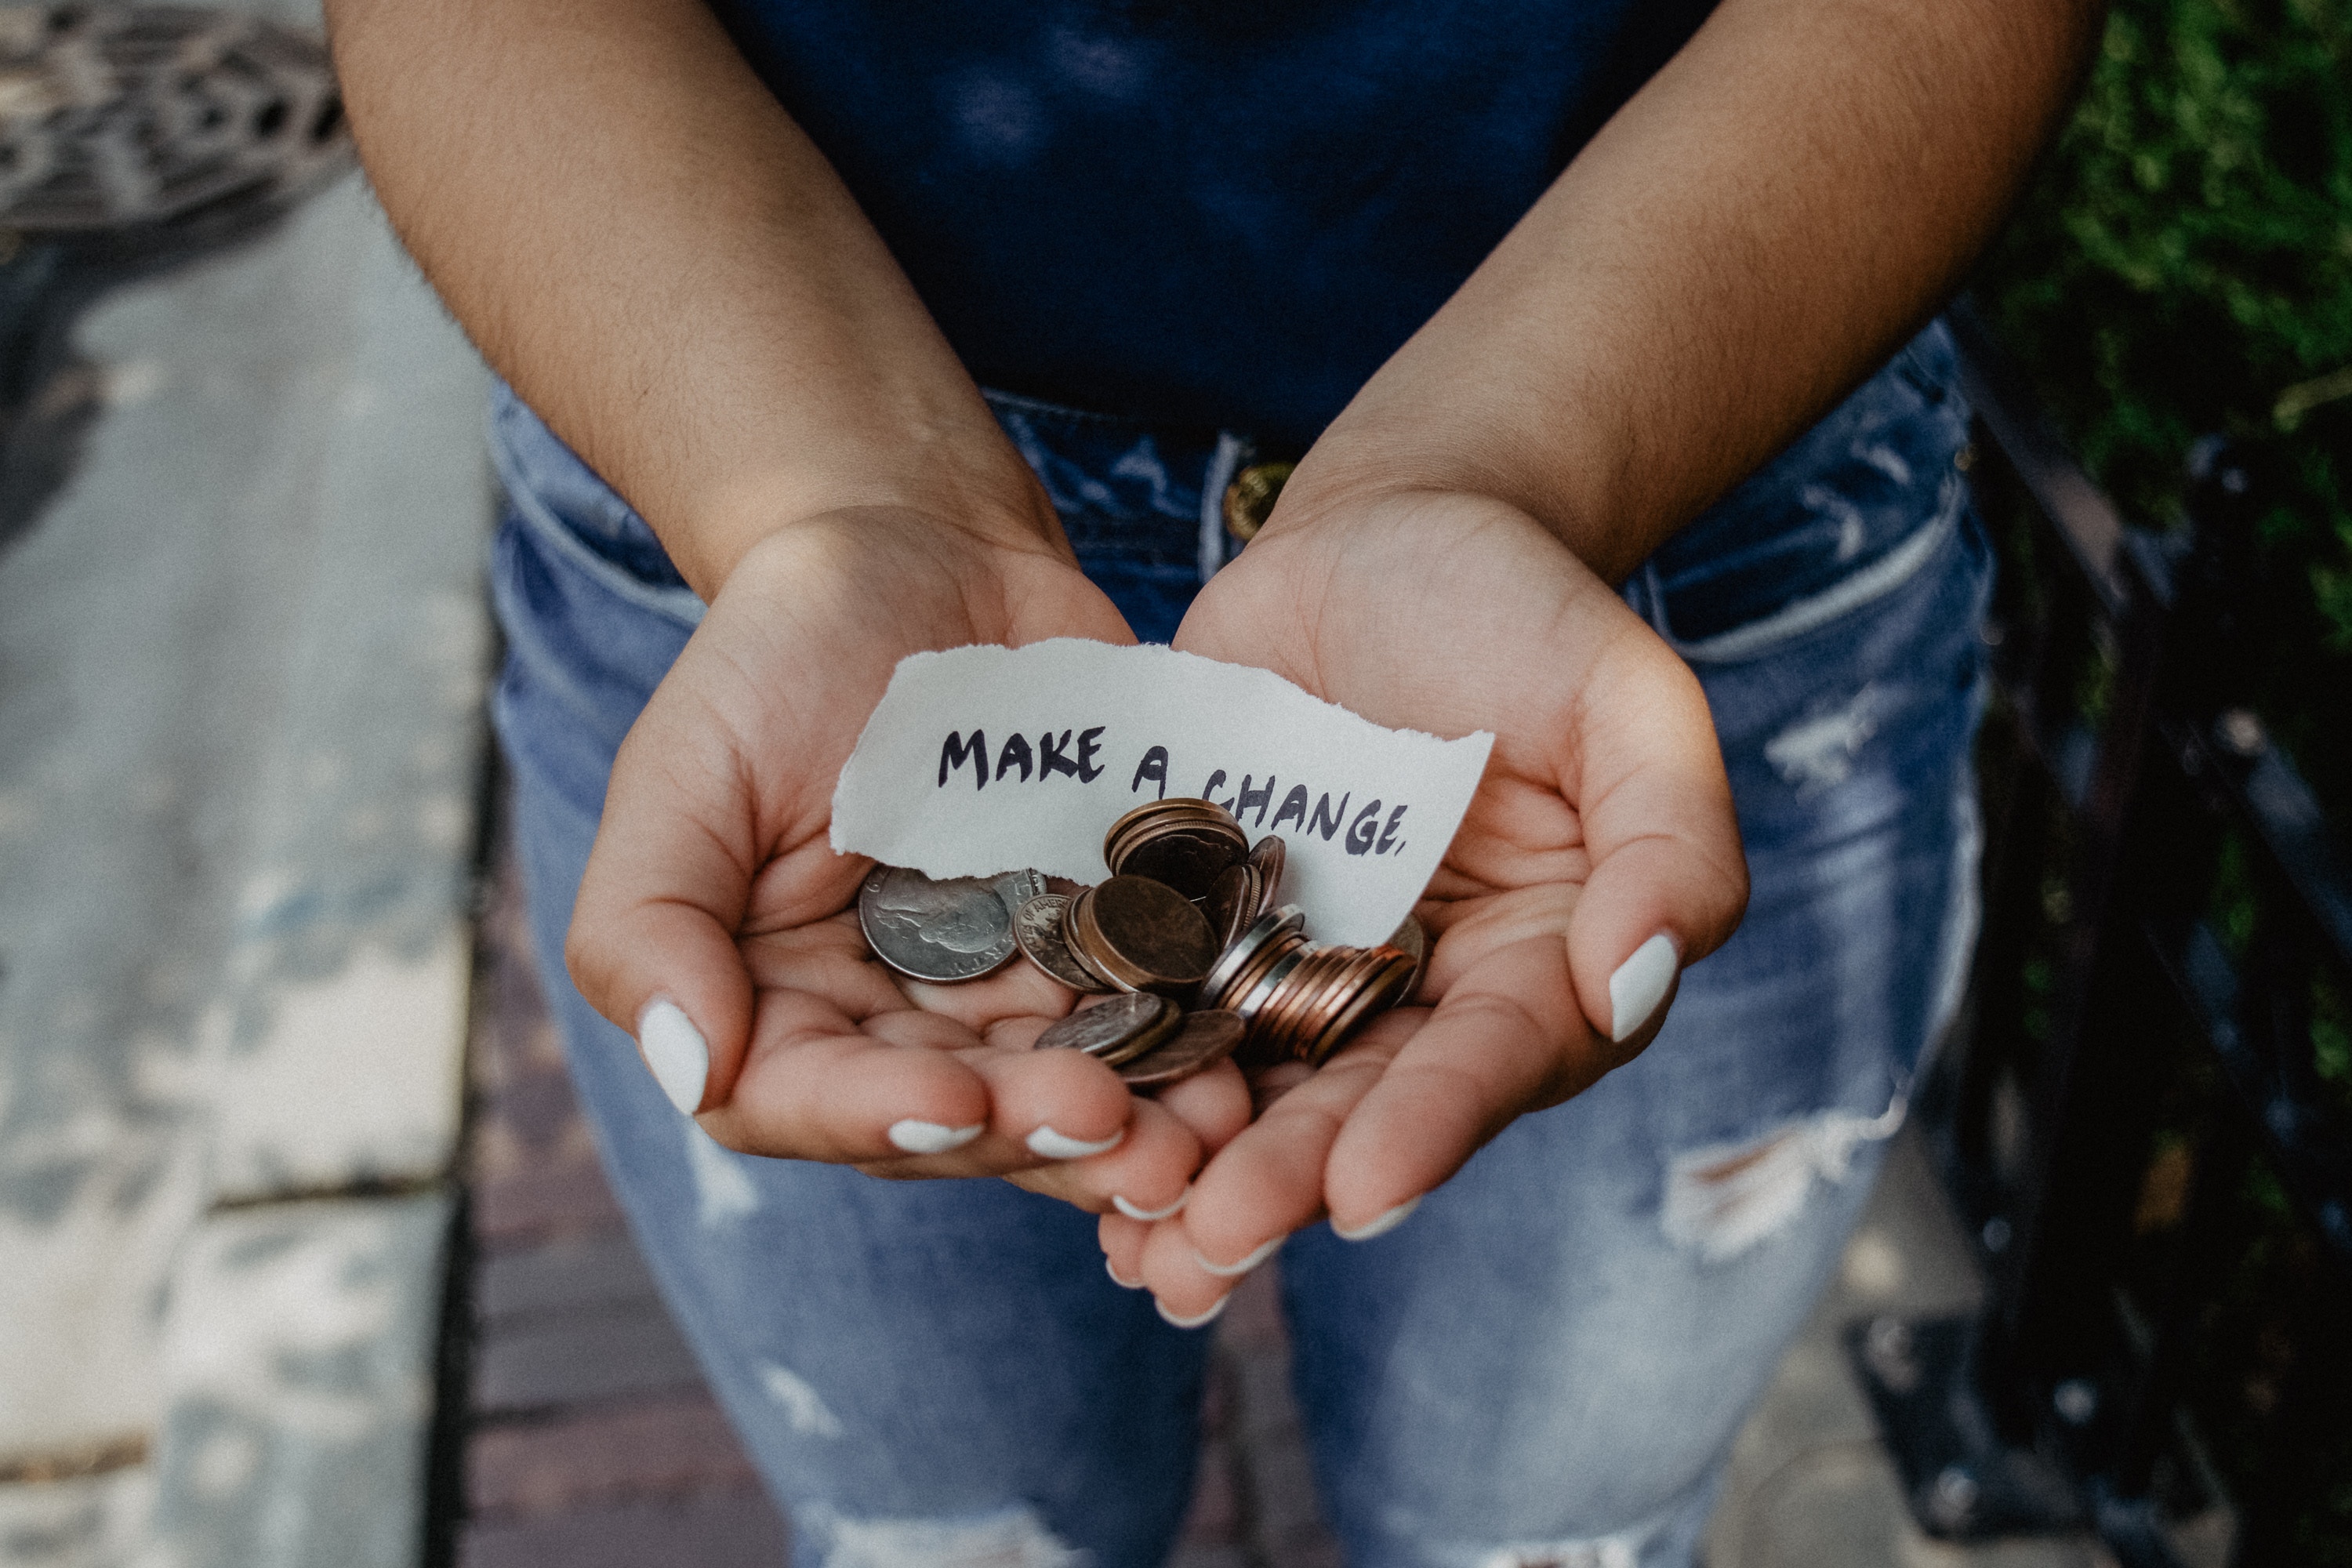 Hands holding a pile of change with a slip of paper reading "Make a change"